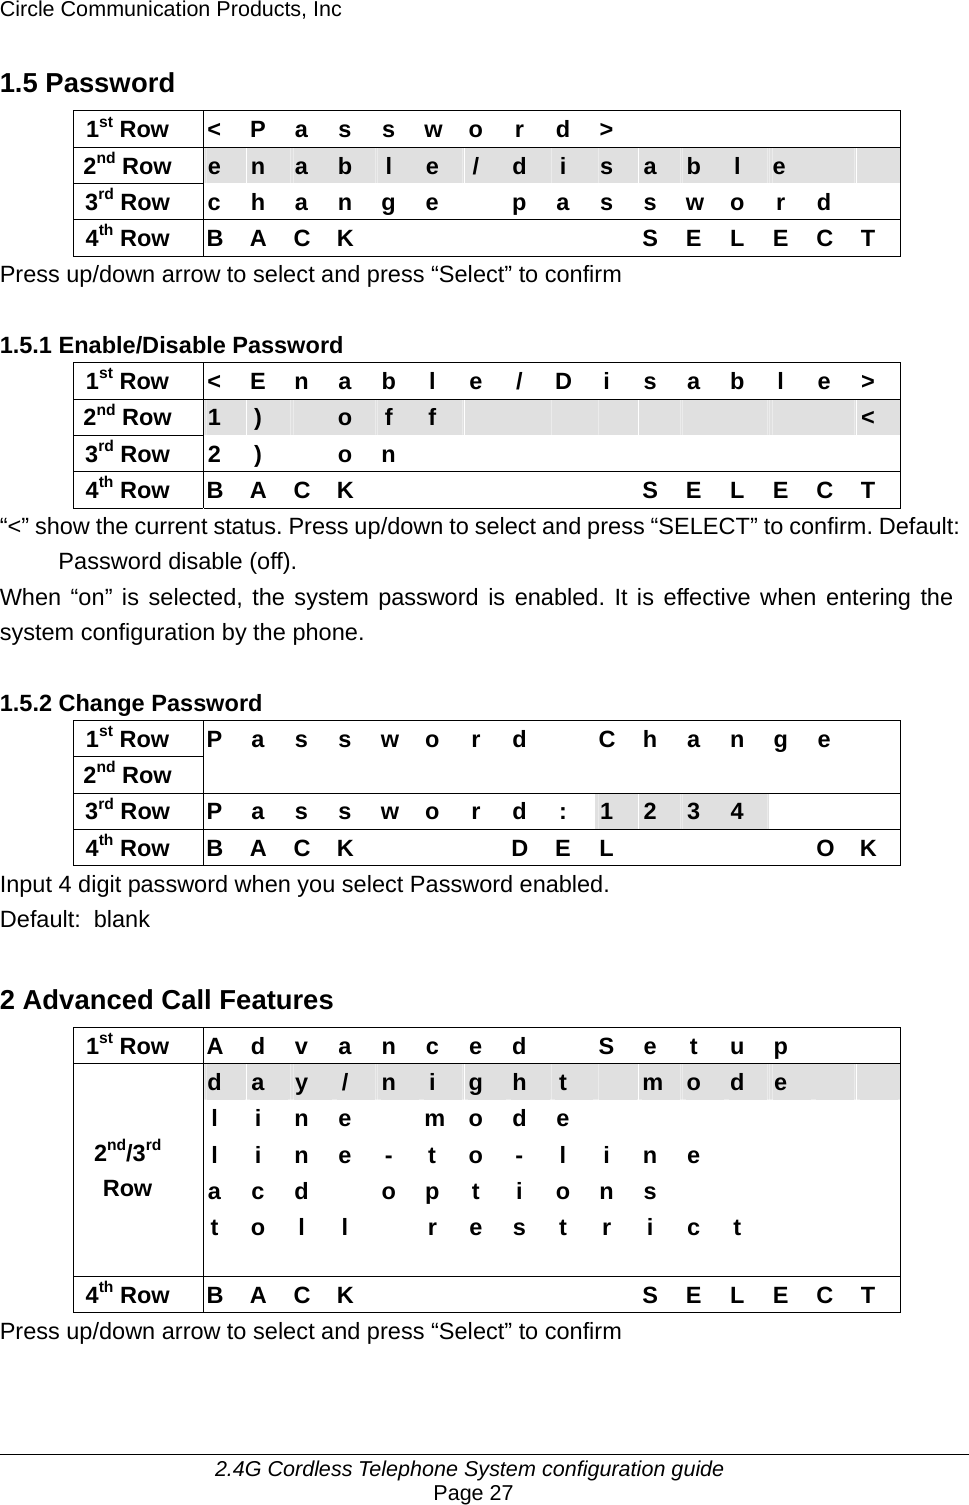 Circle Communication Products, Inc     2.4G Cordless Telephone System configuration guide Page 27 1.5 Password 1st Row &lt; P a s s w o r d &gt;       2nd Row  e  n  a  b  l  e  /  d  i  s  a  b  l  e     3rd Row  c h a n g e    p a s s w o r d   4th Row B A C K       S E L E C T Press up/down arrow to select and press “Select” to confirm  1.5.1 Enable/Disable Password 1st Row  &lt; E n a b l e / D i s a b l e &gt; 2nd Row  1  )   o  f  f                    &lt; 3rd Row 2 )  o n            4th Row B A C K       S E L E C T “&lt;” show the current status. Press up/down to select and press “SELECT” to confirm. Default:  Password disable (off). When “on” is selected, the system password is enabled. It is effective when entering the system configuration by the phone.  1.5.2 Change Password 1st Row  P a s s w o r d    C h a n g e   2nd Row                 3rd Row  P a s s w o r d :  1  2  3  4     4th Row  B A C K        D E L          O K Input 4 digit password when you select Password enabled. Default: blank  2 Advanced Call Features 1st Row  A d v a n c e d    S e t u p     d  a  y  /  n  i  g  h  t   m  o  d  e     l i n e  m o d e        l i n e - t o - l i n e        a c d  o p t i o n s            2nd/3rd Row   t o l  l    r e s t r i c t       4th Row B A C K       S E L E C T Press up/down arrow to select and press “Select” to confirm  